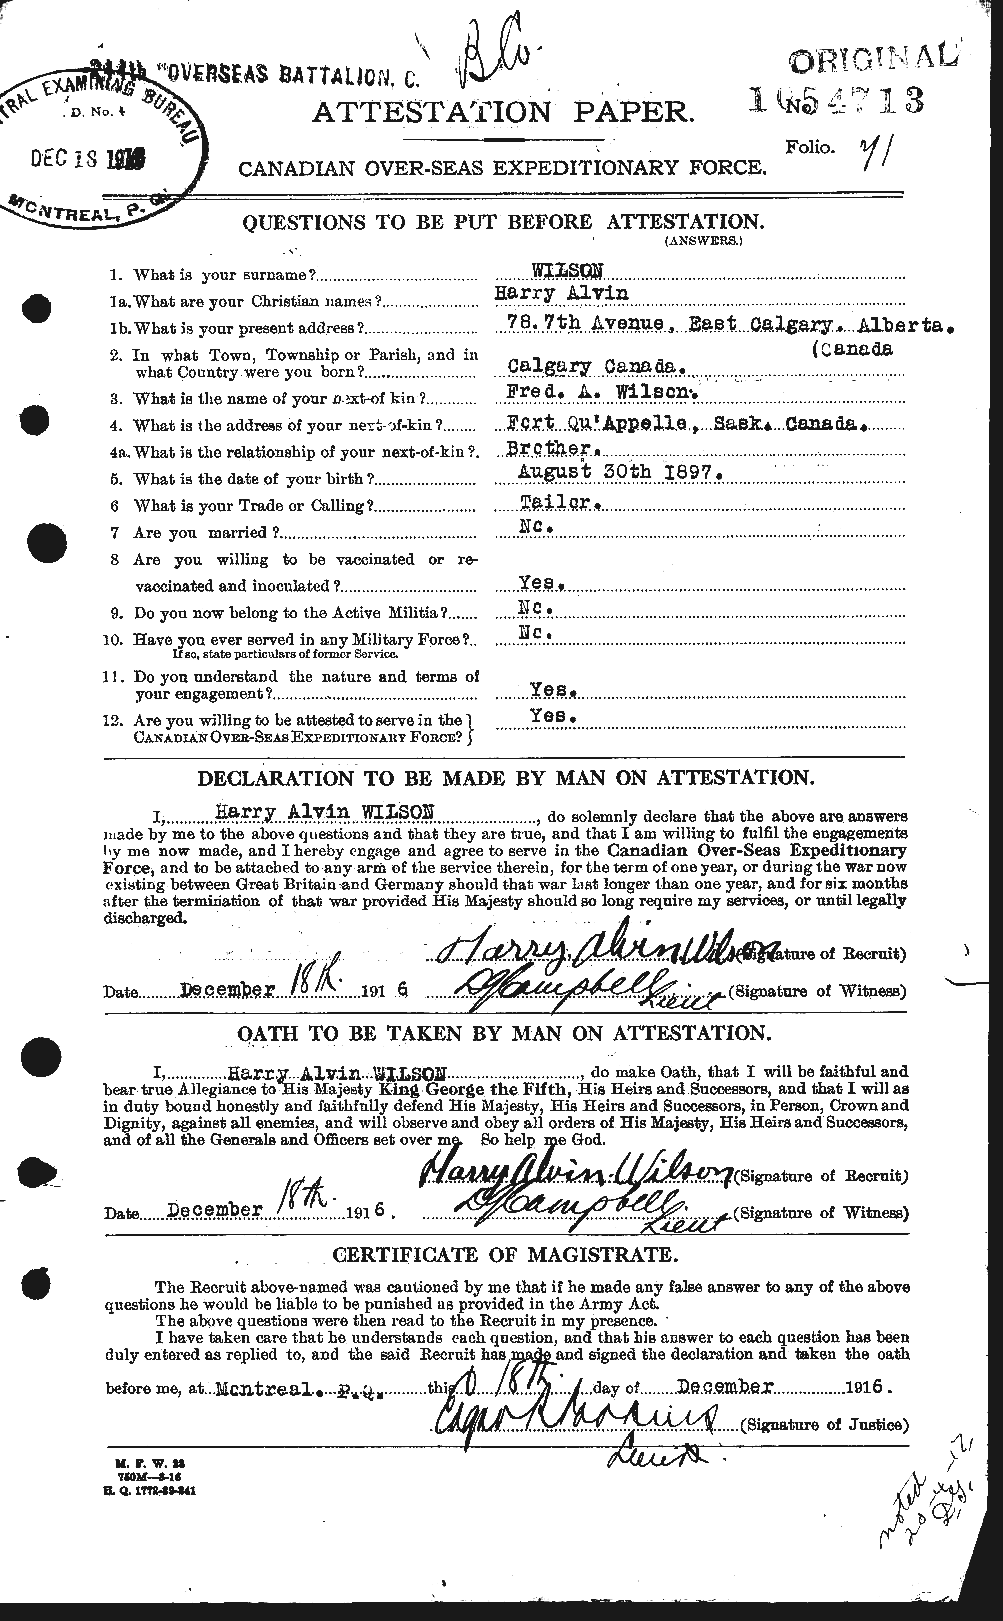 Personnel Records of the First World War - CEF 679456a